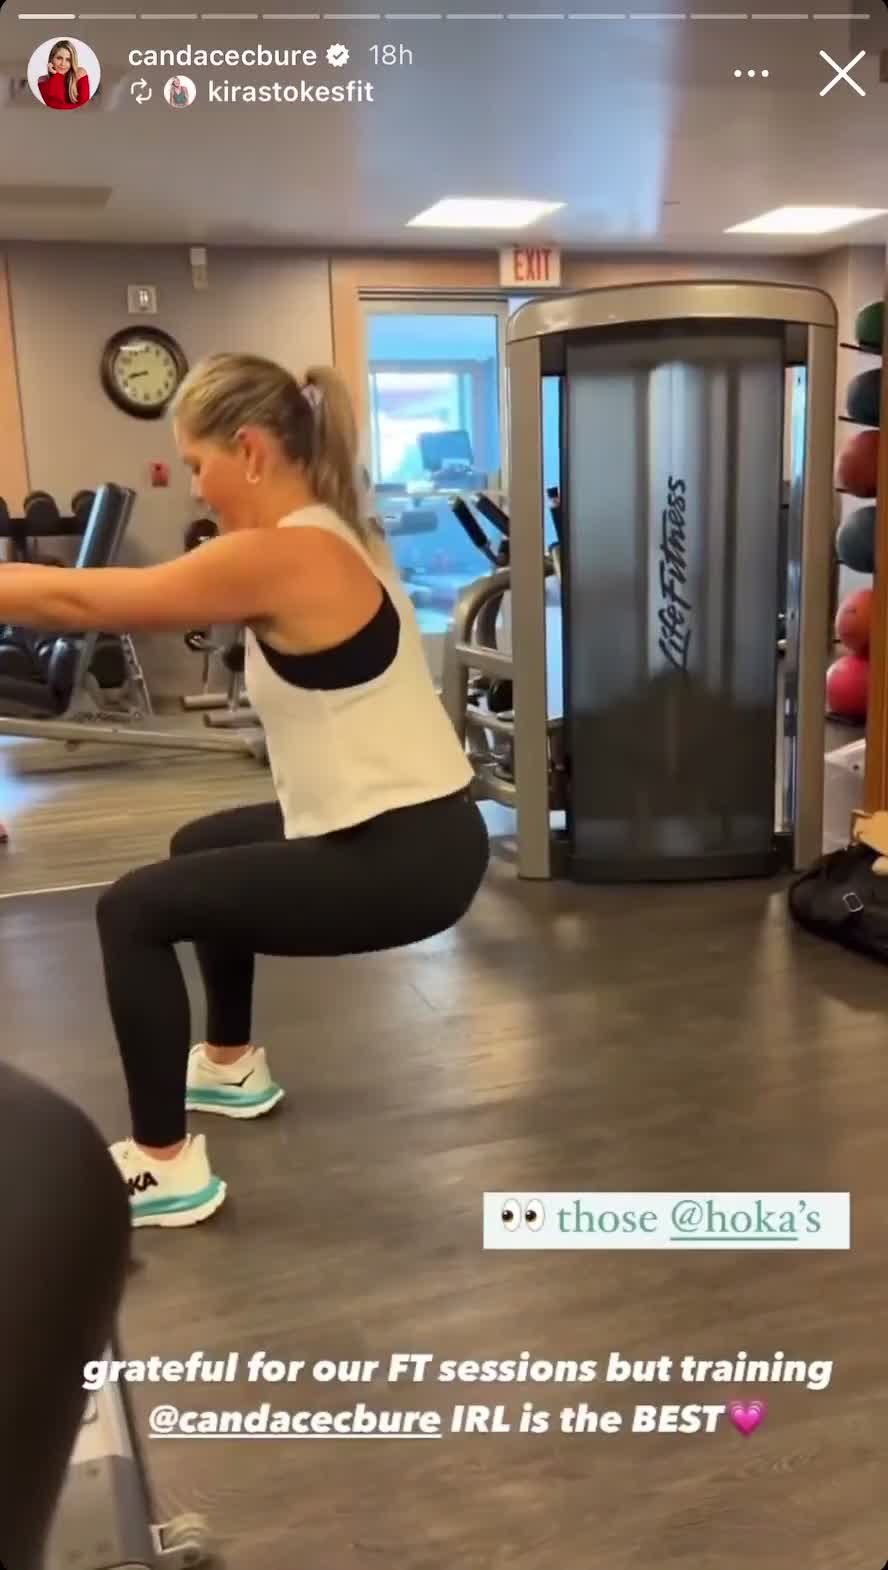 Candace Cameron Bure Just Dropped Her Exact Arms, Butt, and Legs Workout on IG